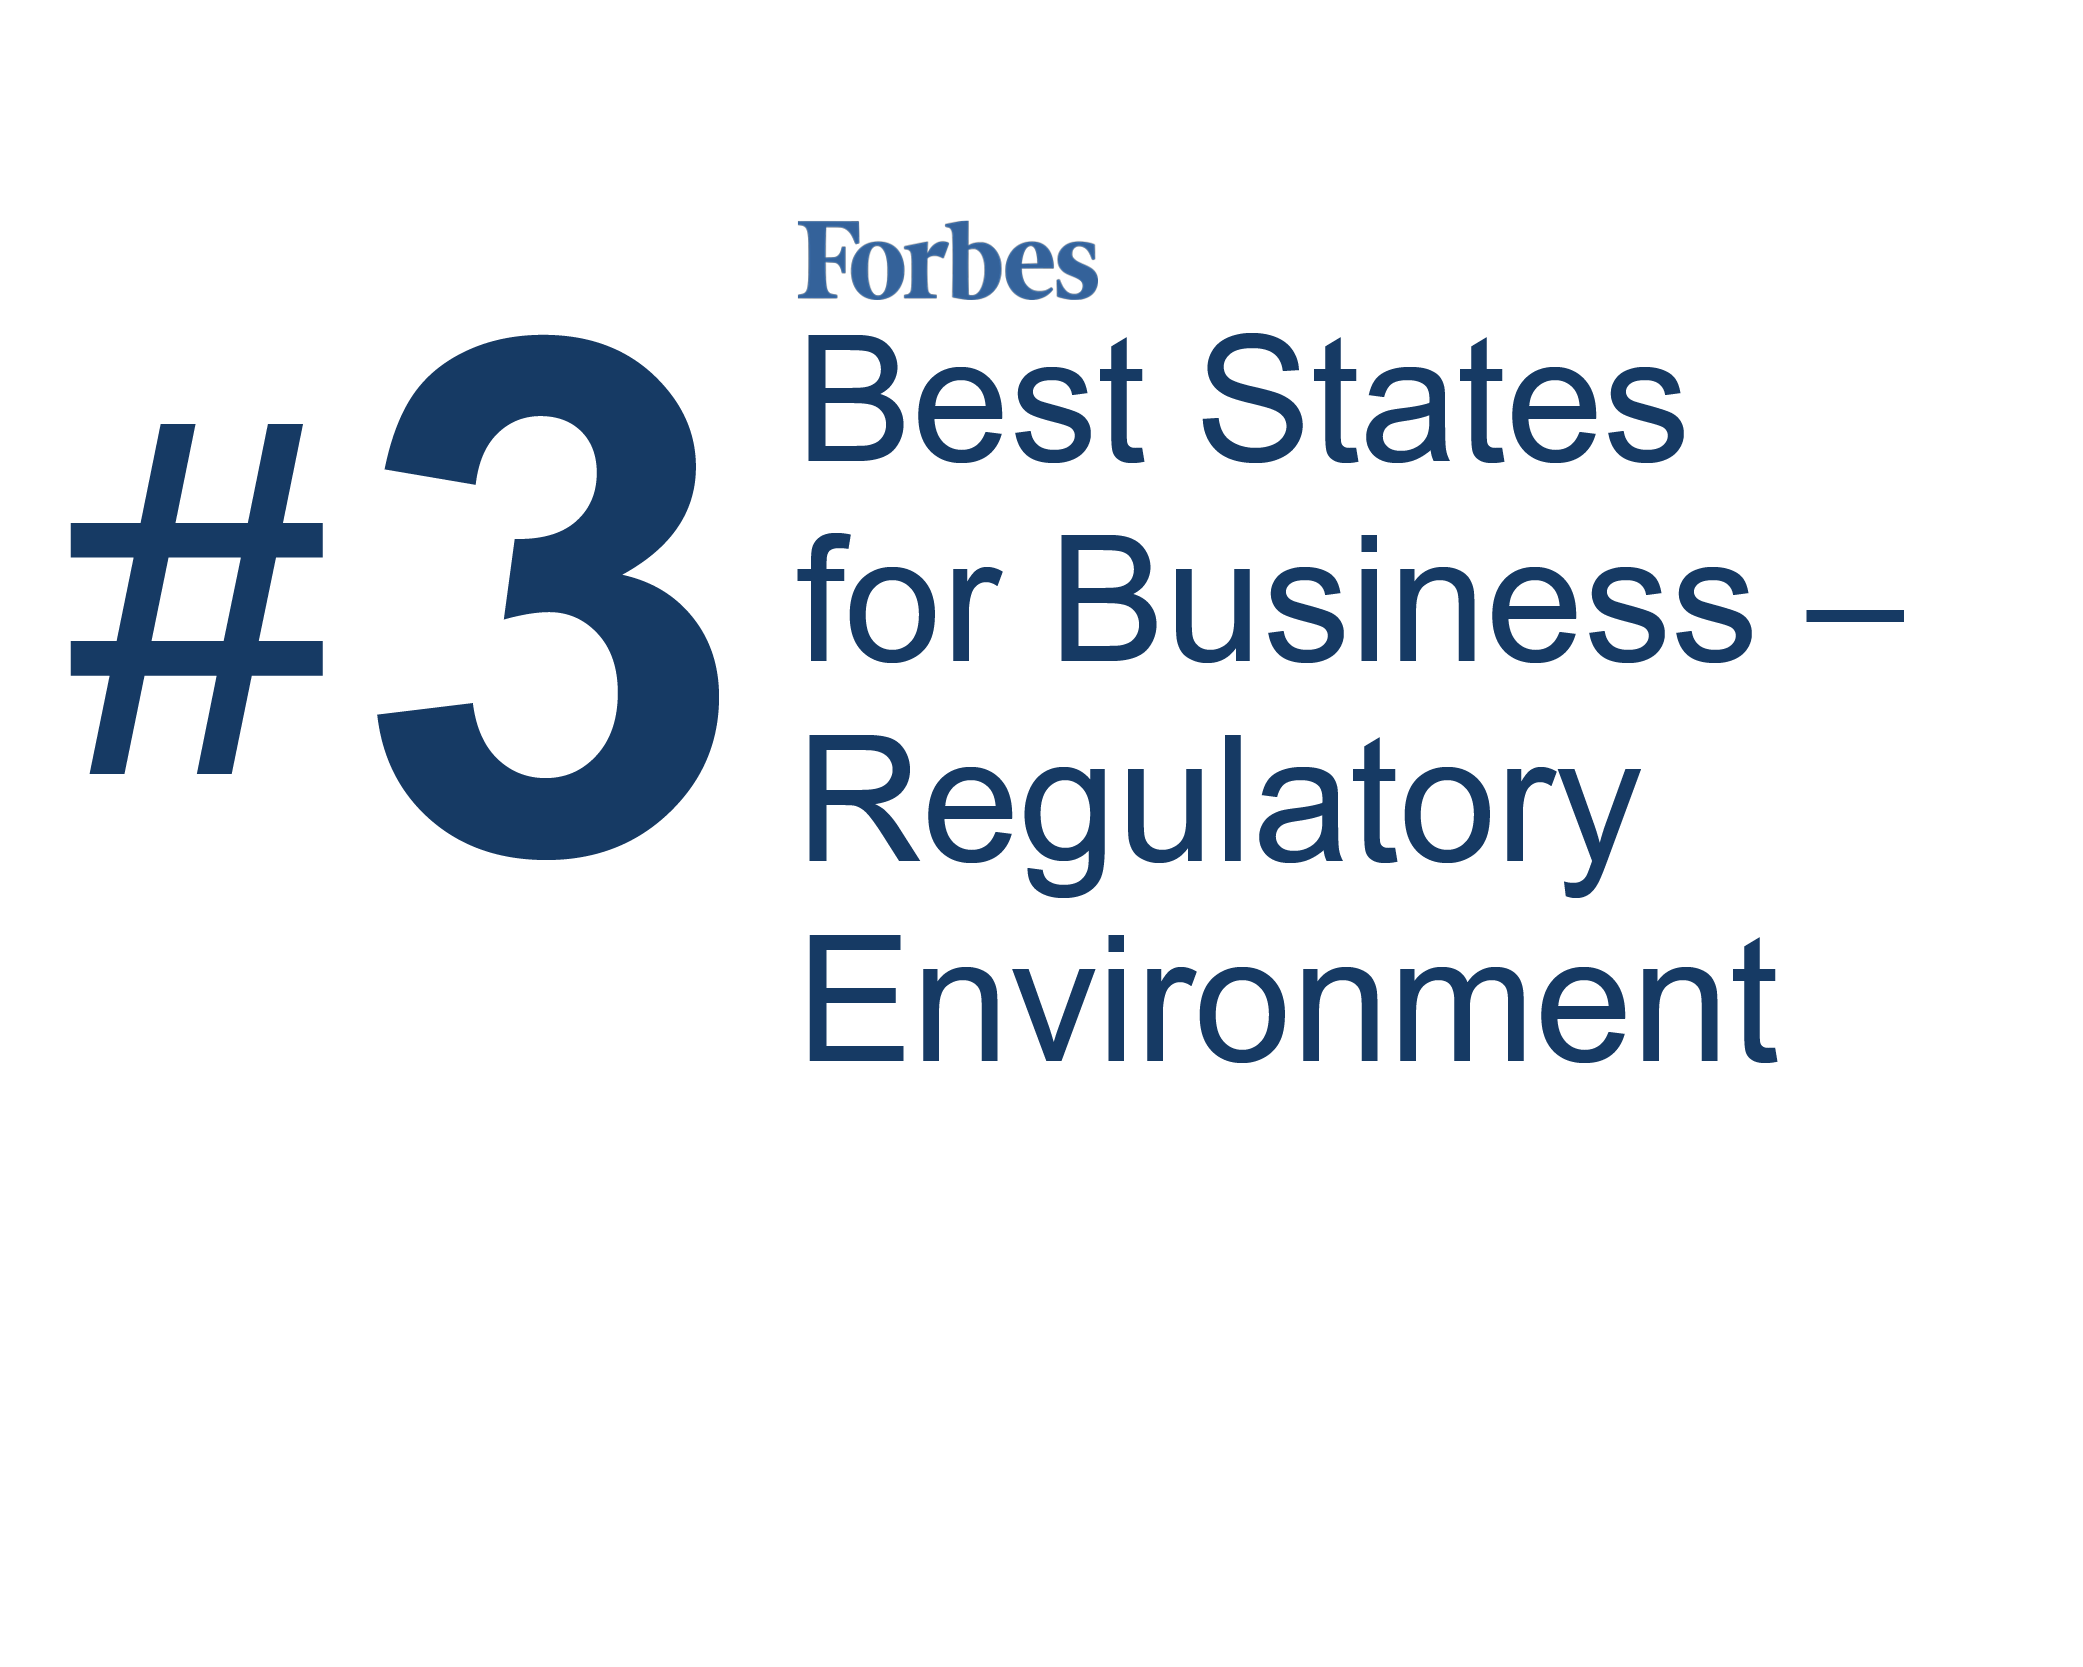 Forbes_#3_Best States for Business - Regulatory Environment